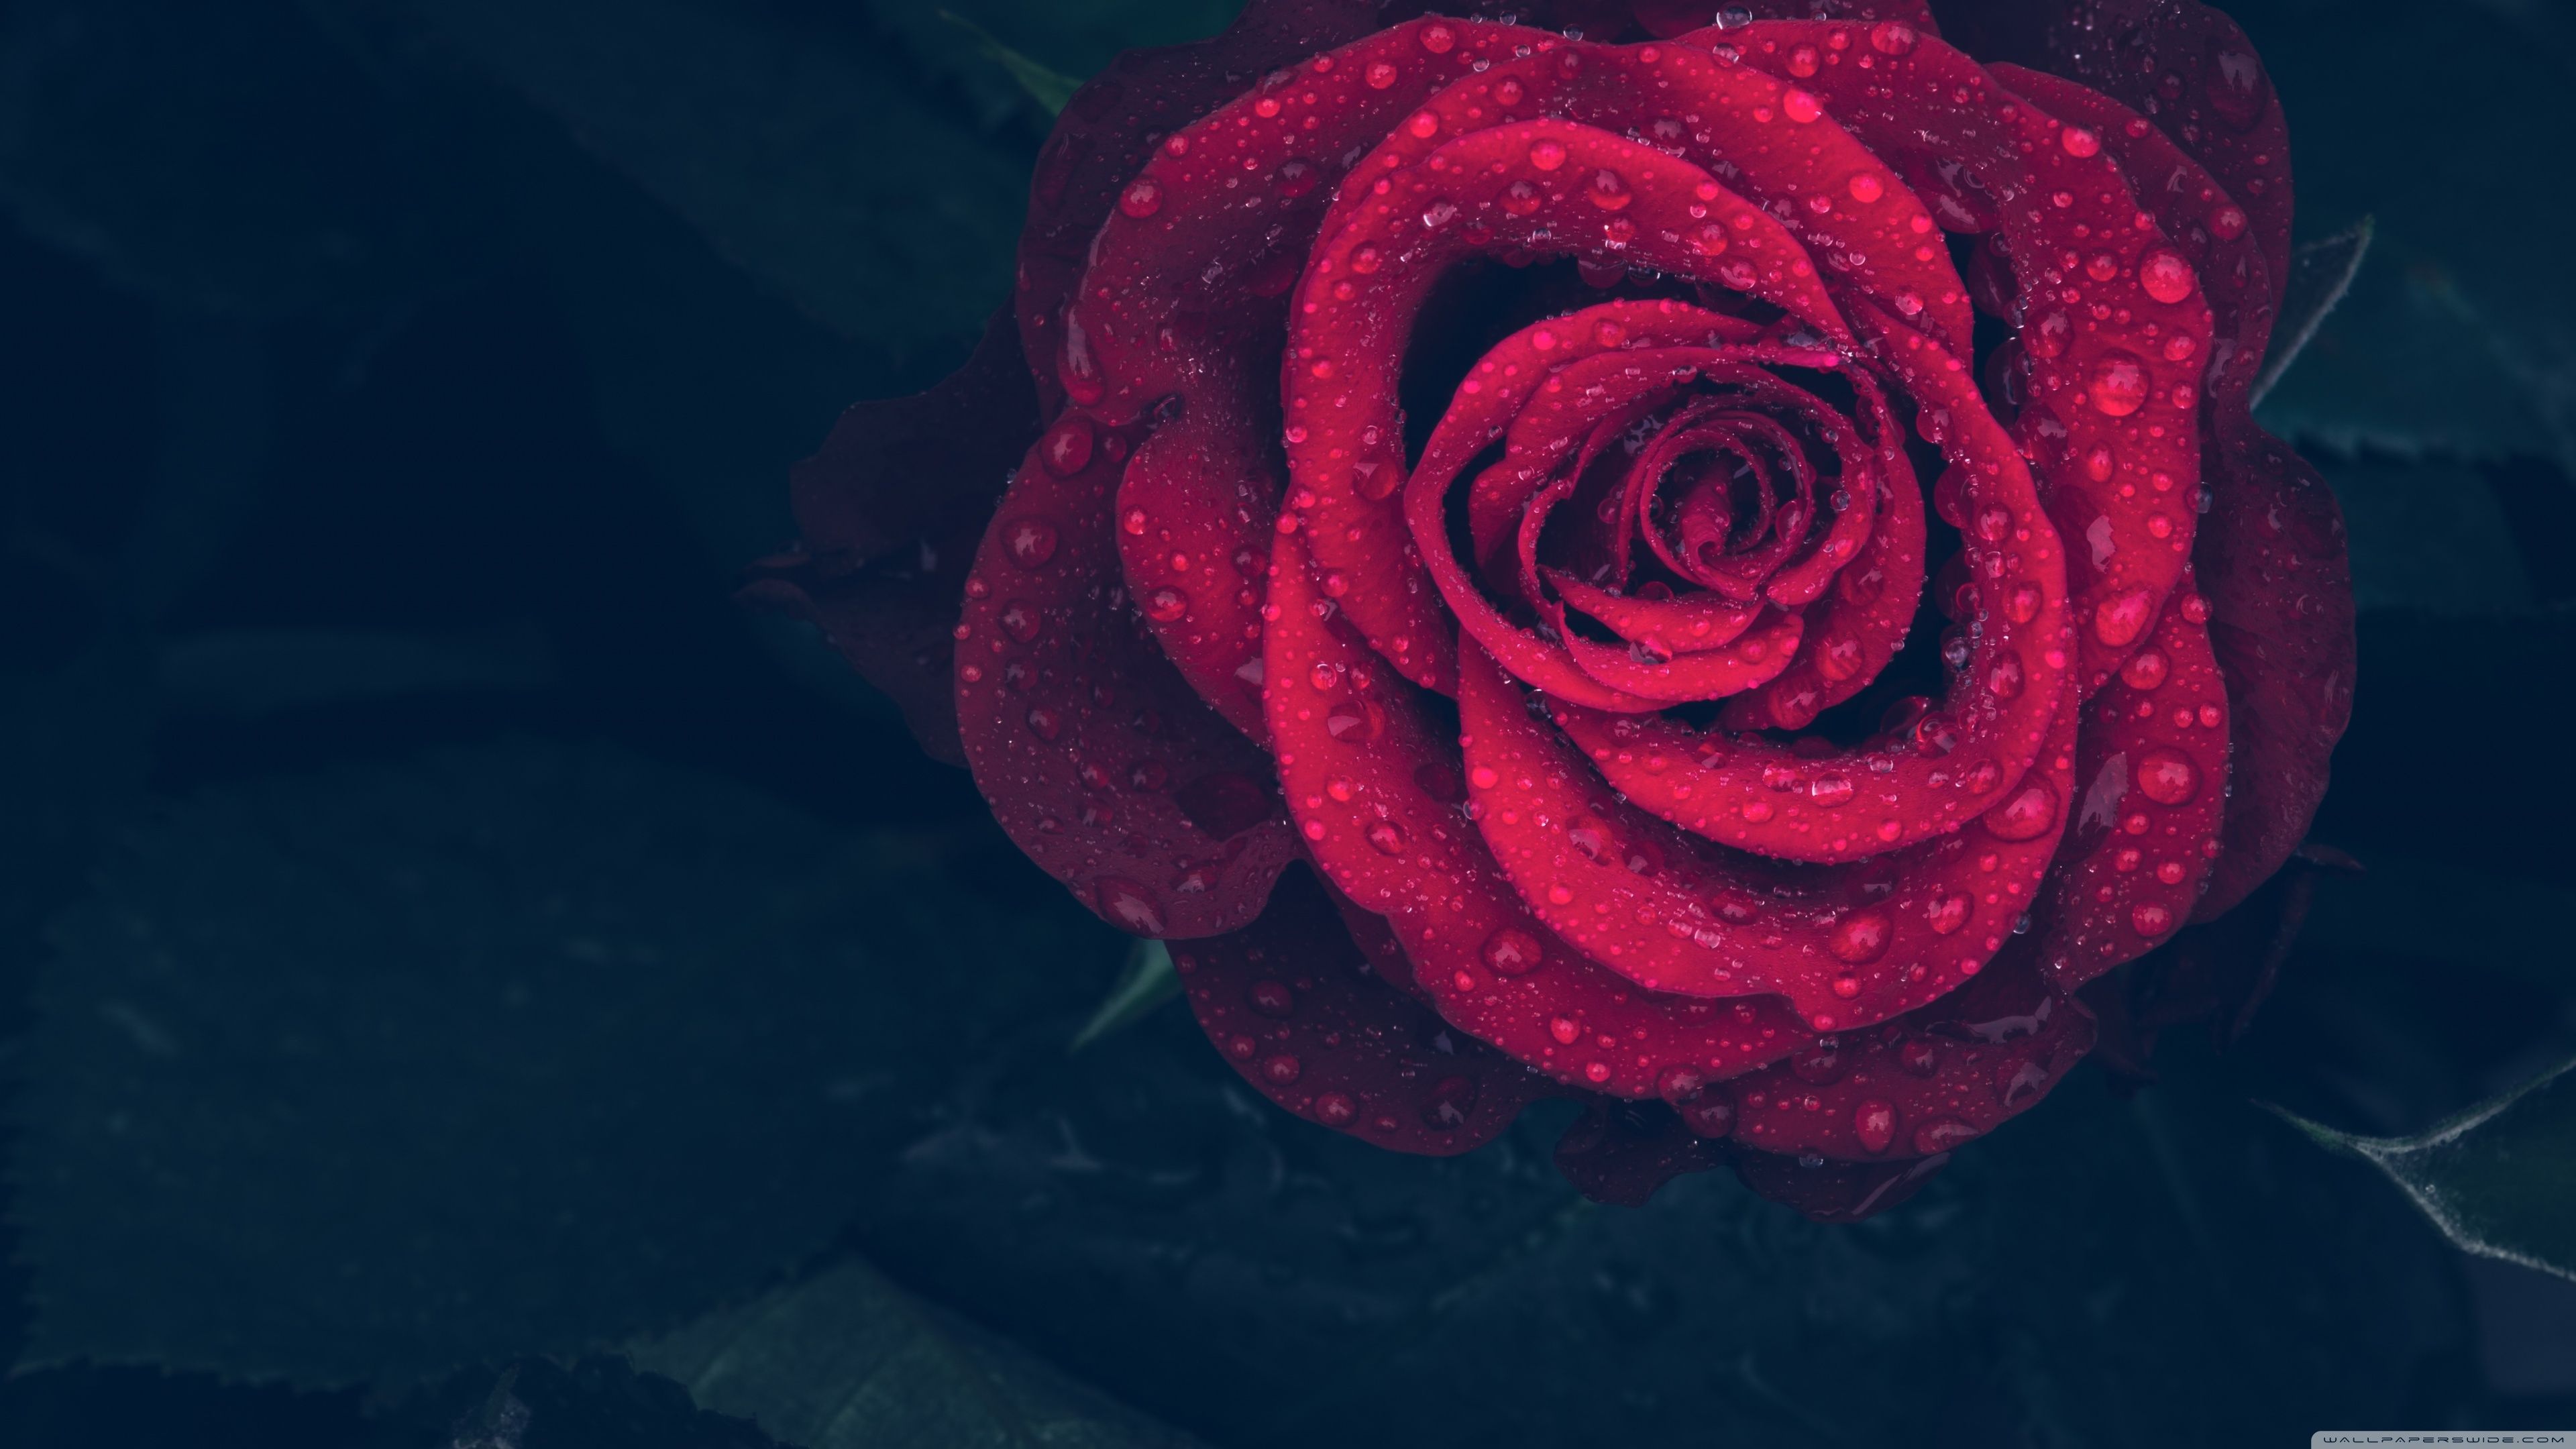 Red Rose with Water Drops Ultra HD Desktop Backgrounds Wallpapers for : Widescreen & UltraWide Desktop & Laptop : Multi Display, Dual & Triple Monitor : Tablet : Smartphone